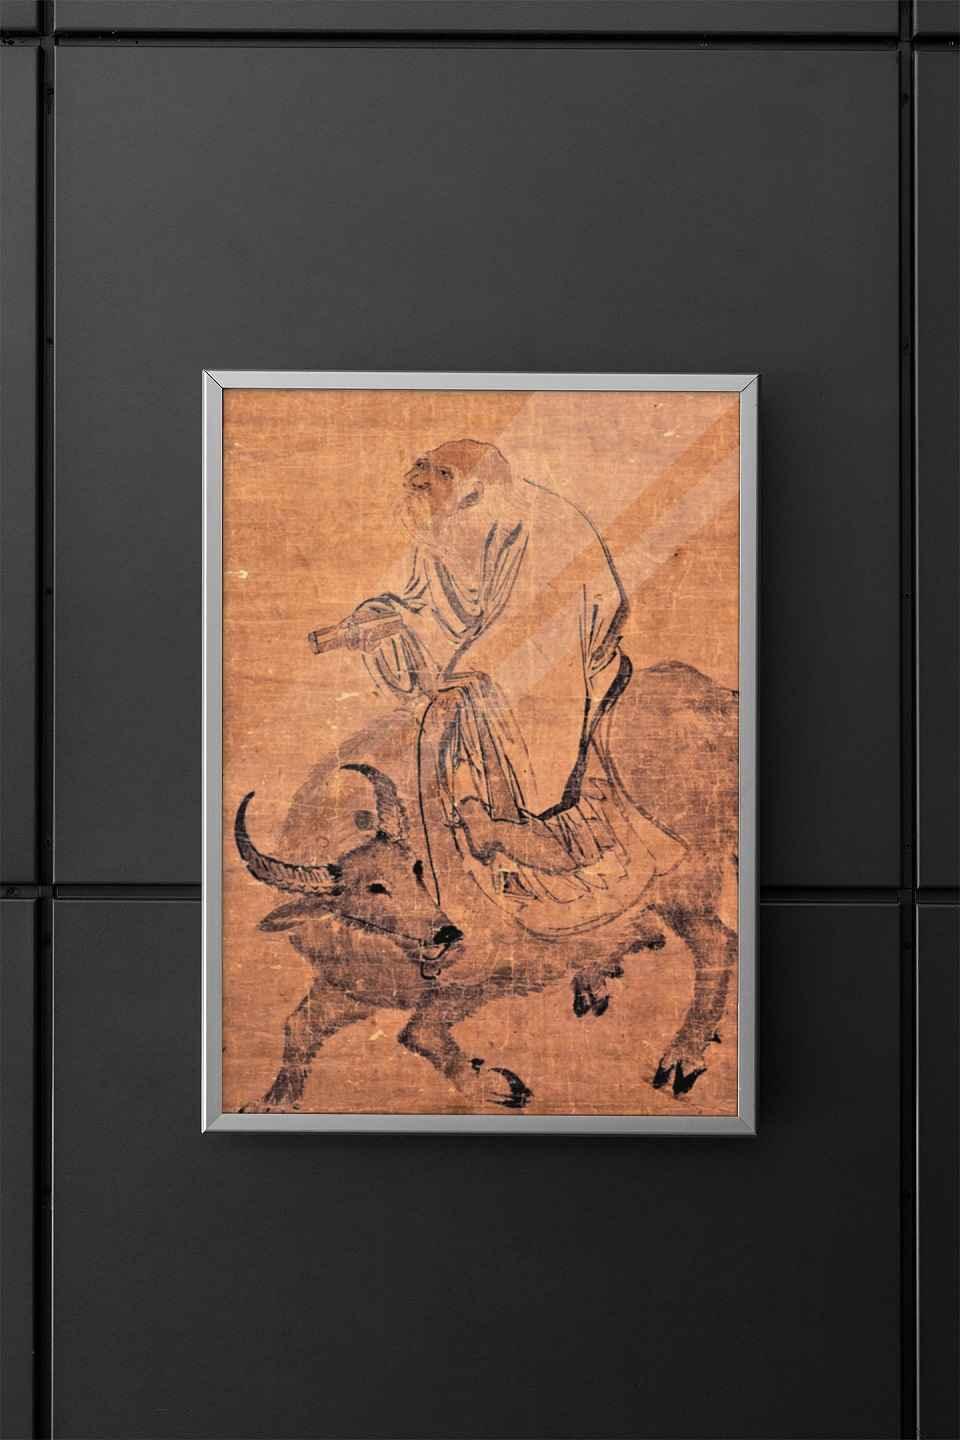 Poster case containing a Lao Tzu poster] mounted on a modern wall.